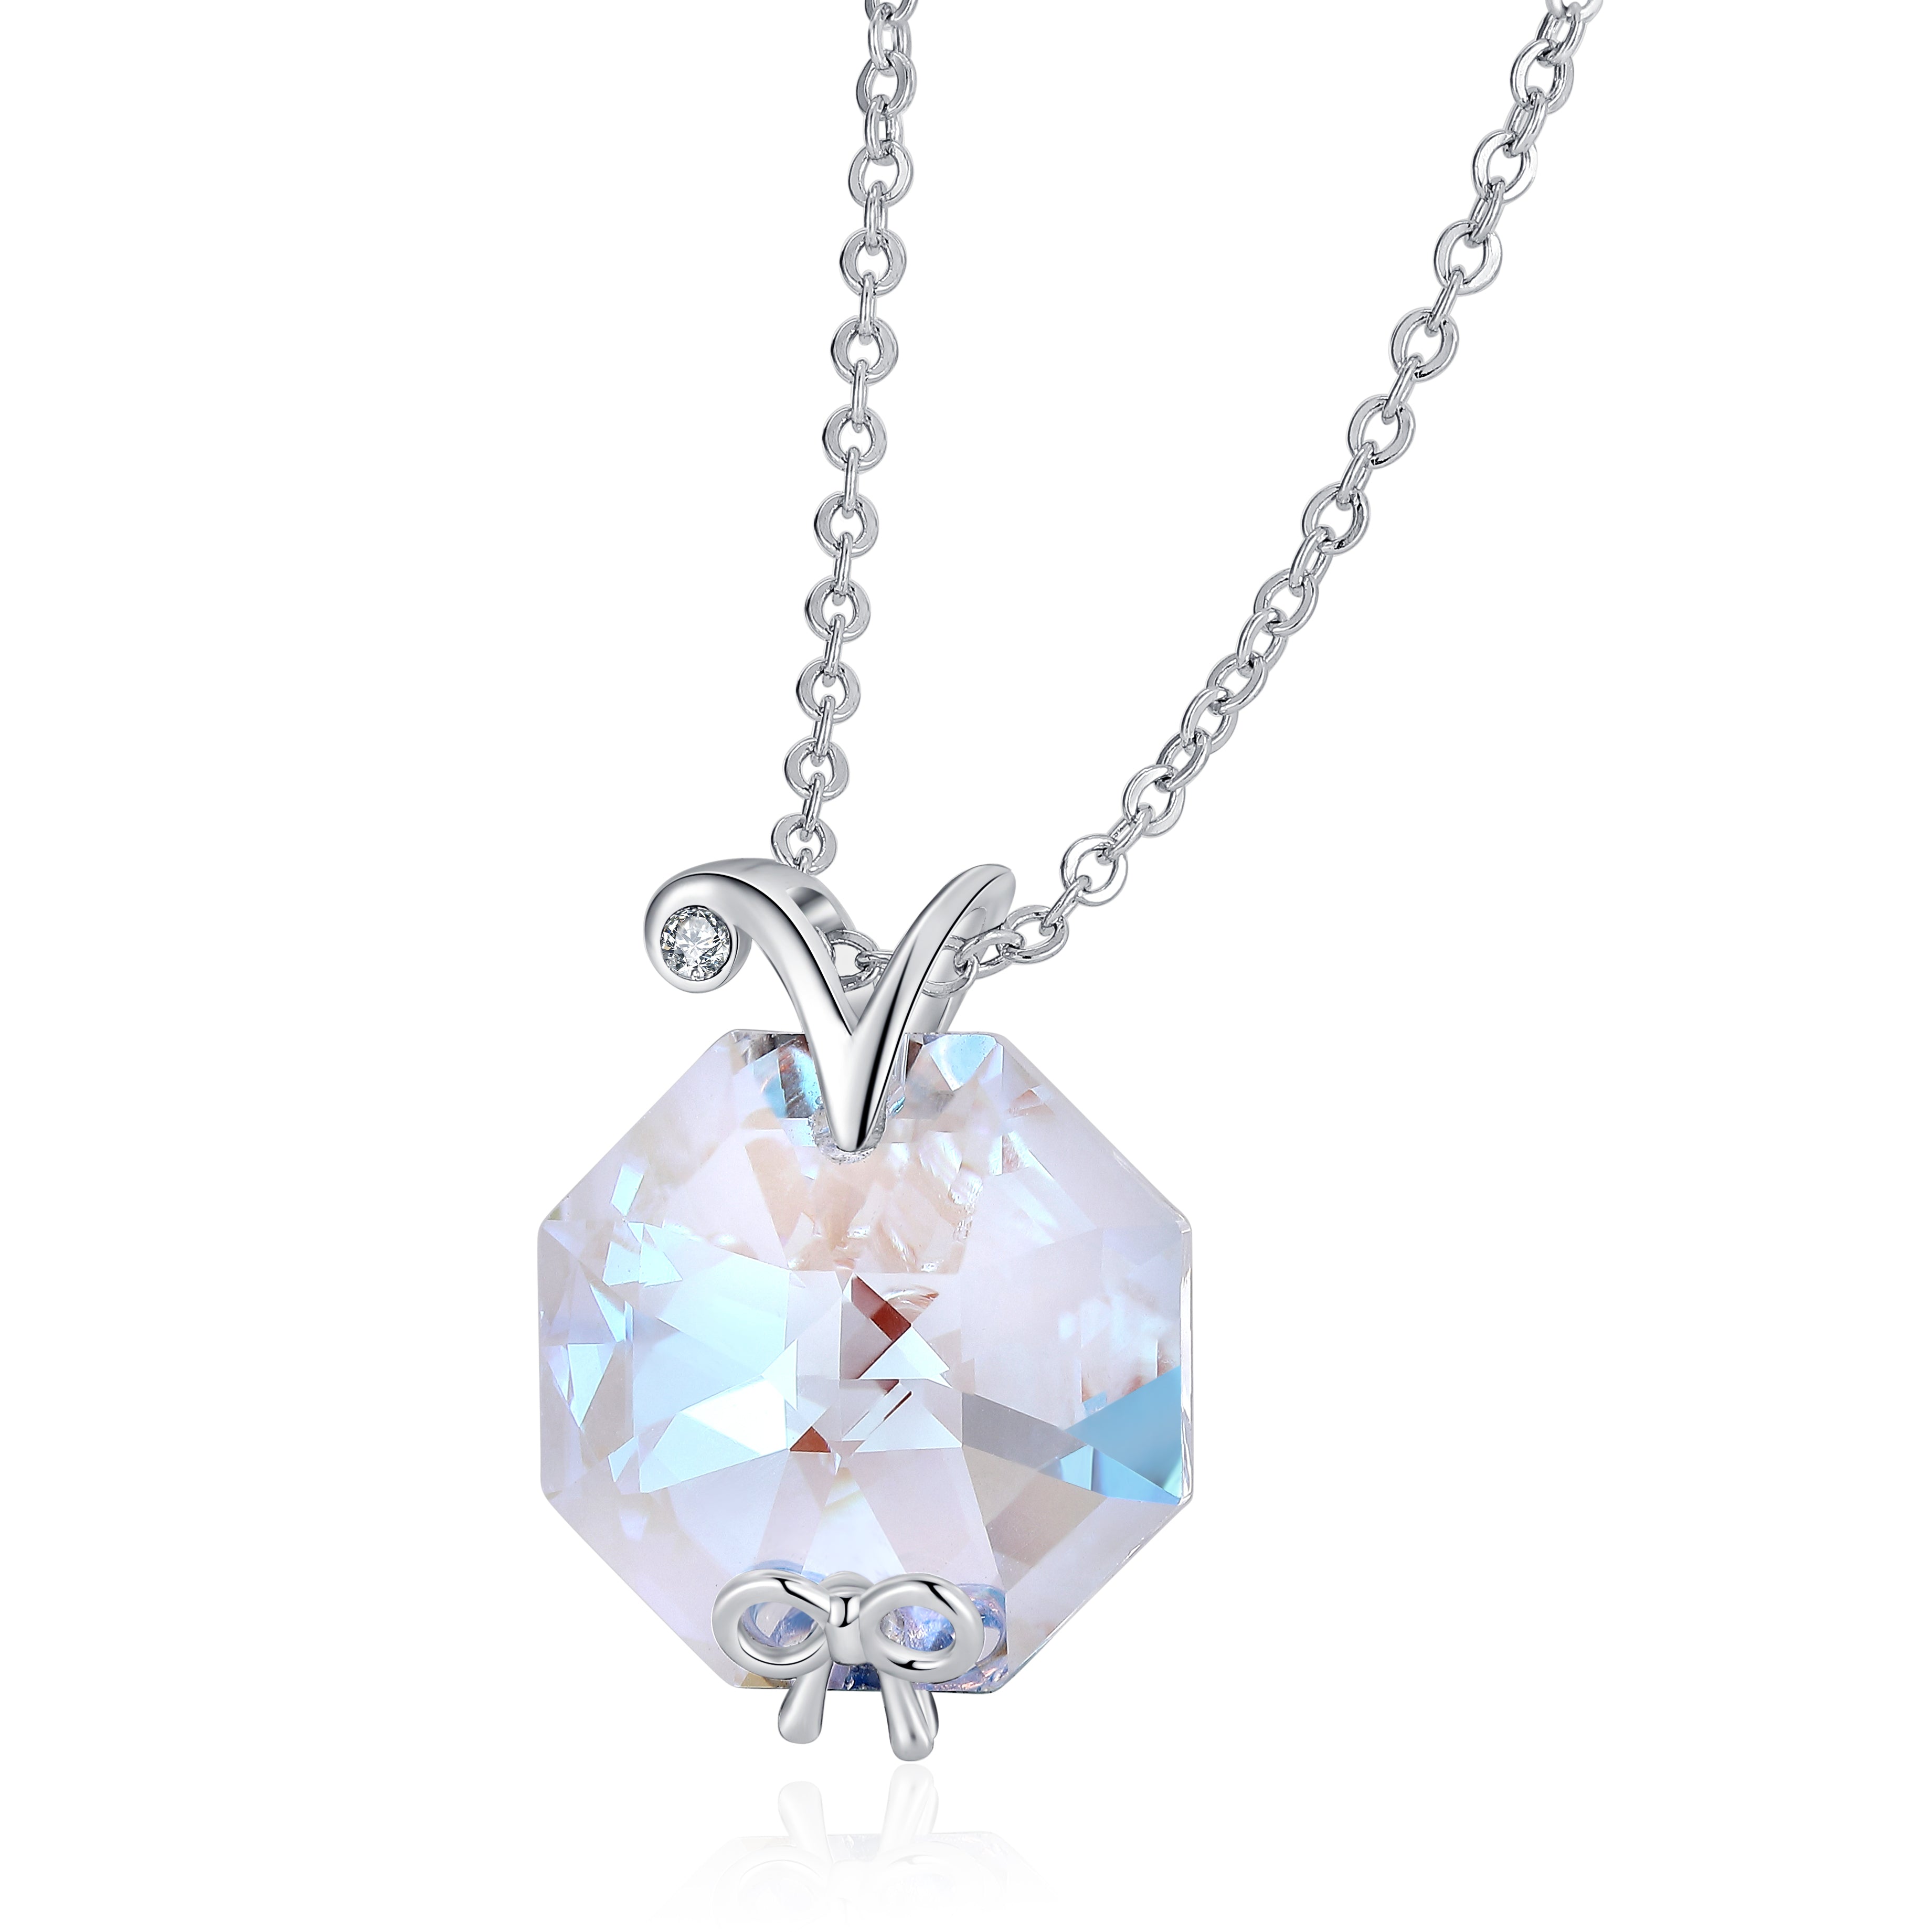 sterling silver bow girl heart pendant necklace adopts the top Austrian crystal